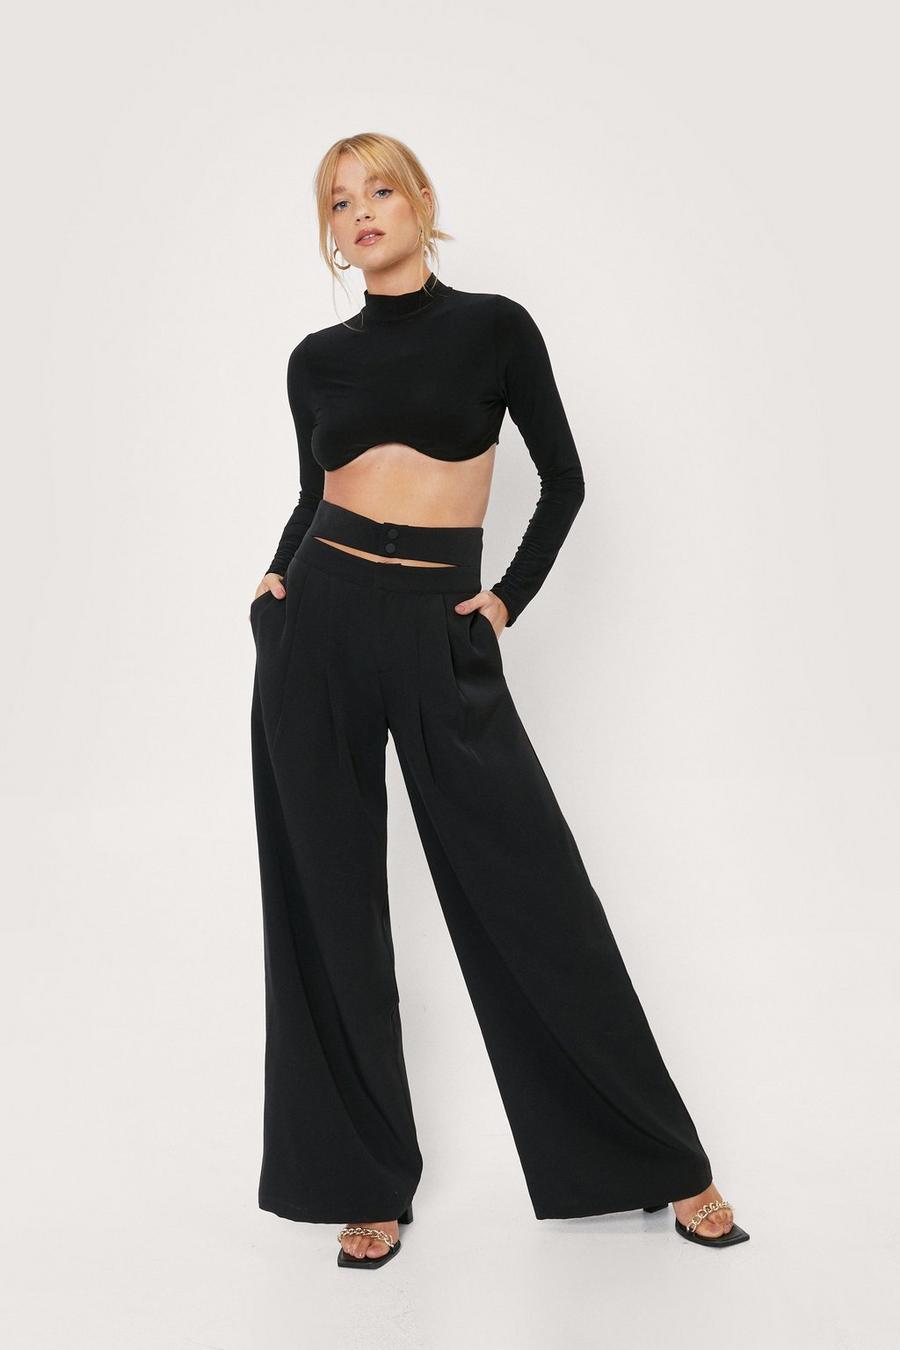 Petite Clothing | Stylist Outfits for Petite Women | Nasty Gal